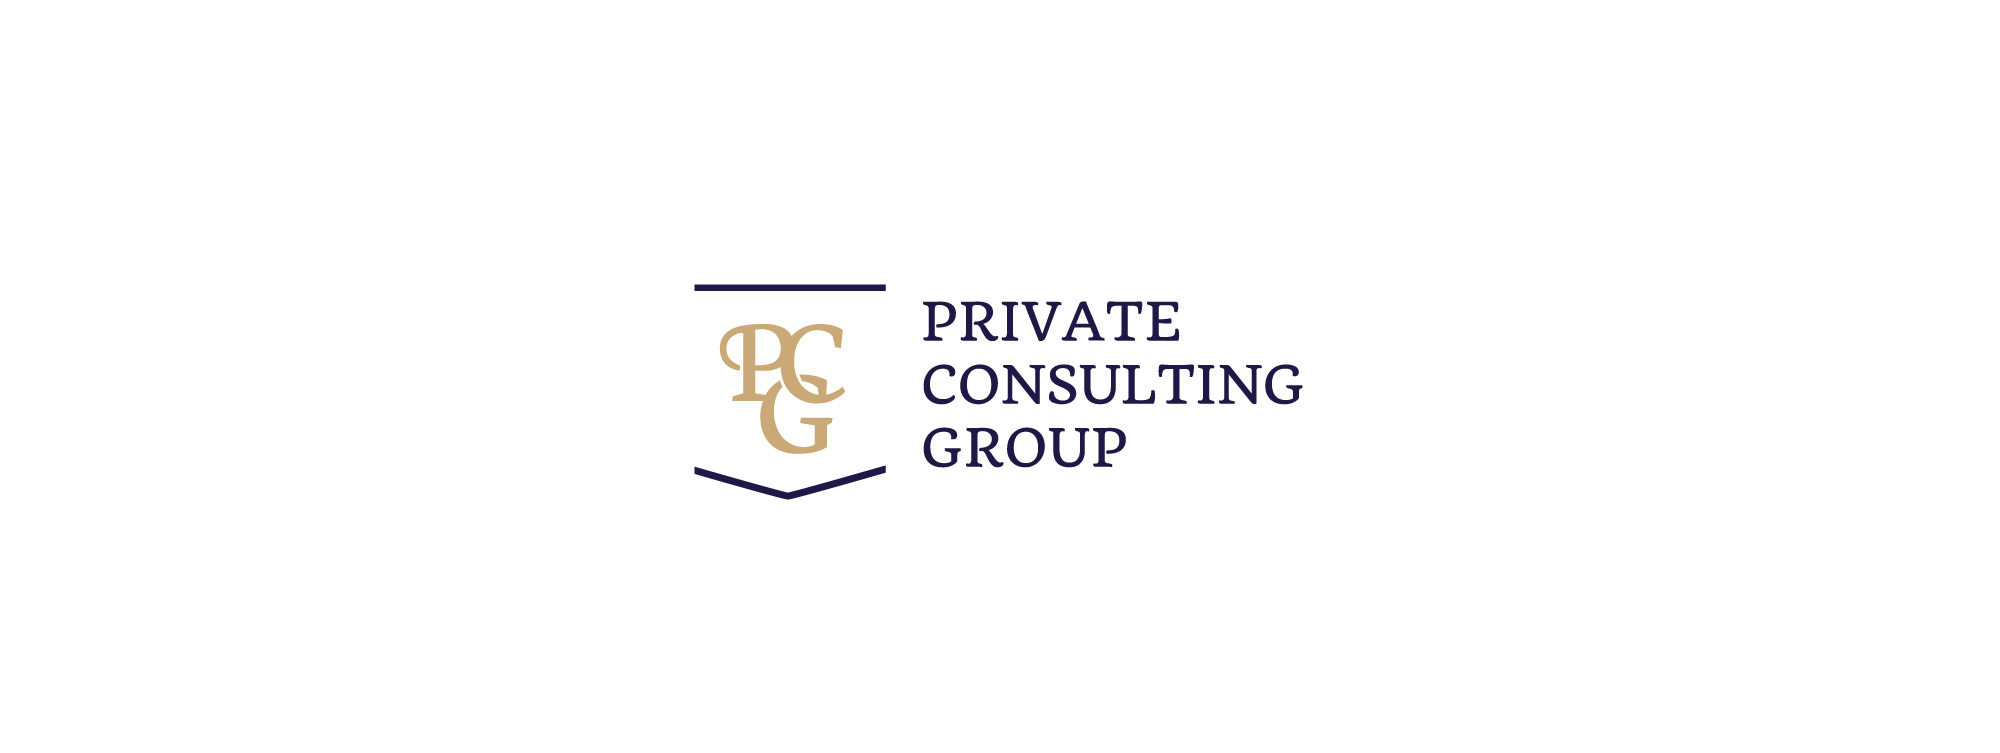 Private Consulting Group